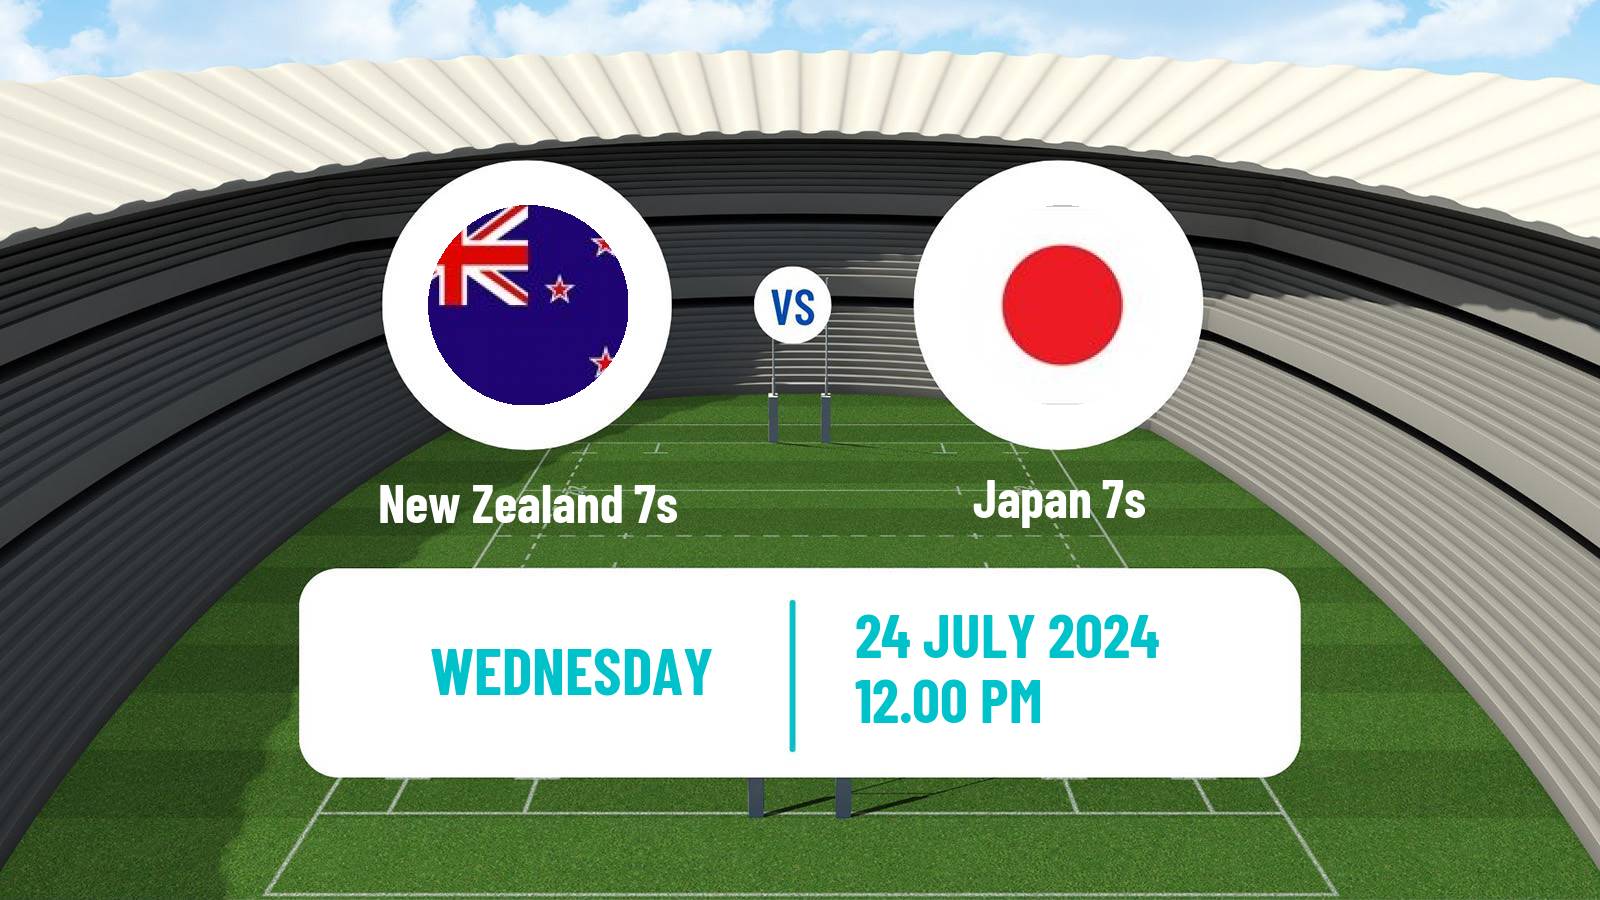 Rugby union Olympic Games 7s Rugby New Zealand 7s - Japan 7s